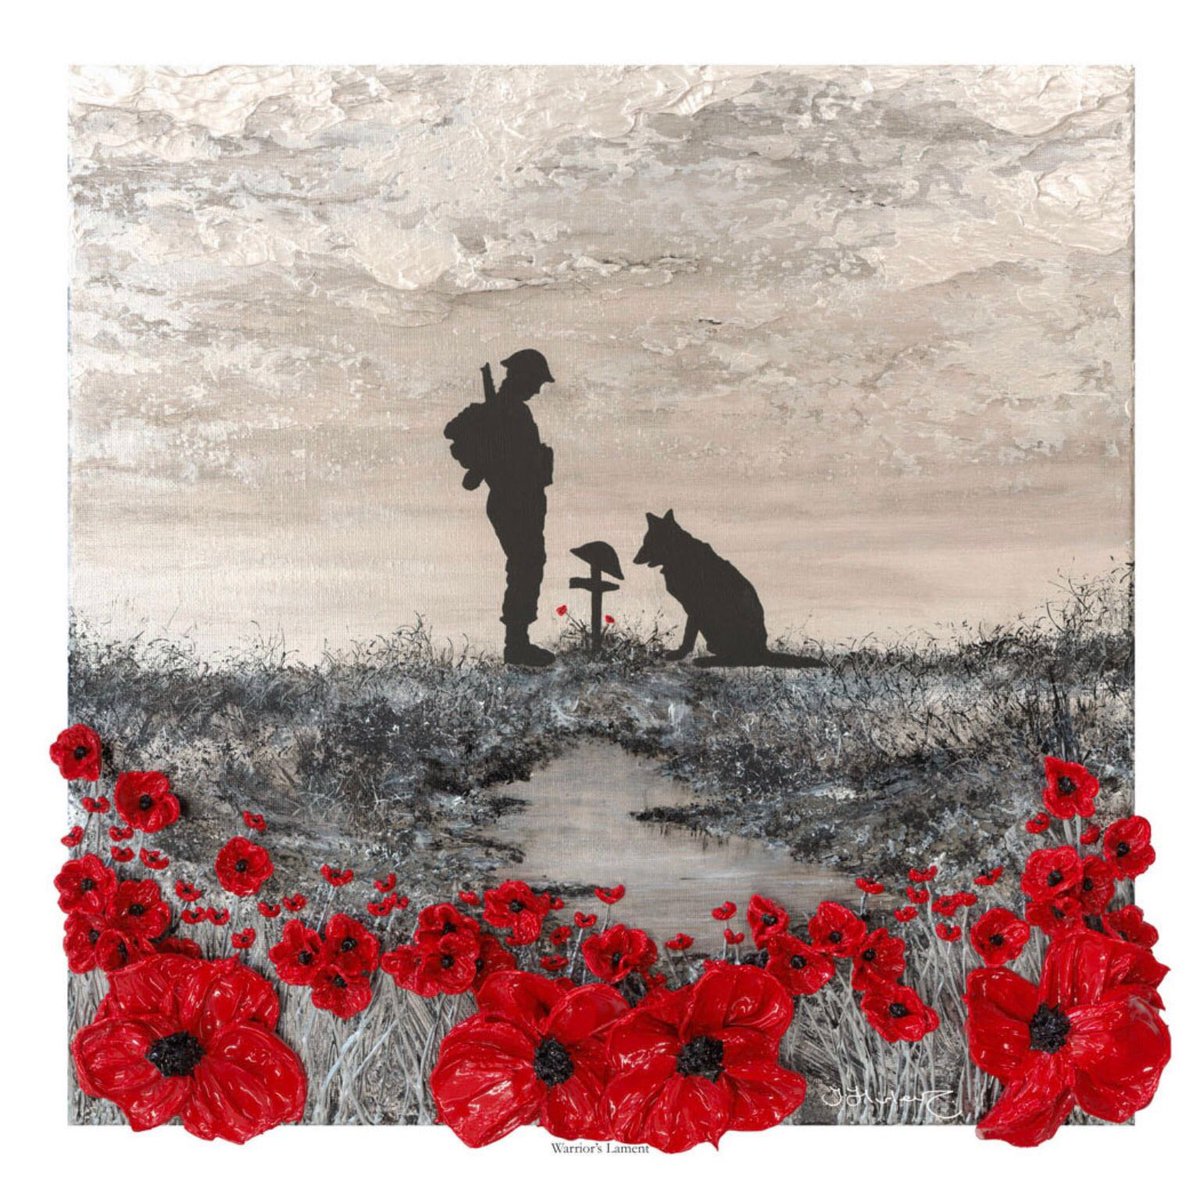 To all who served…. Lest we forget 🌺 #ArmistaceDay